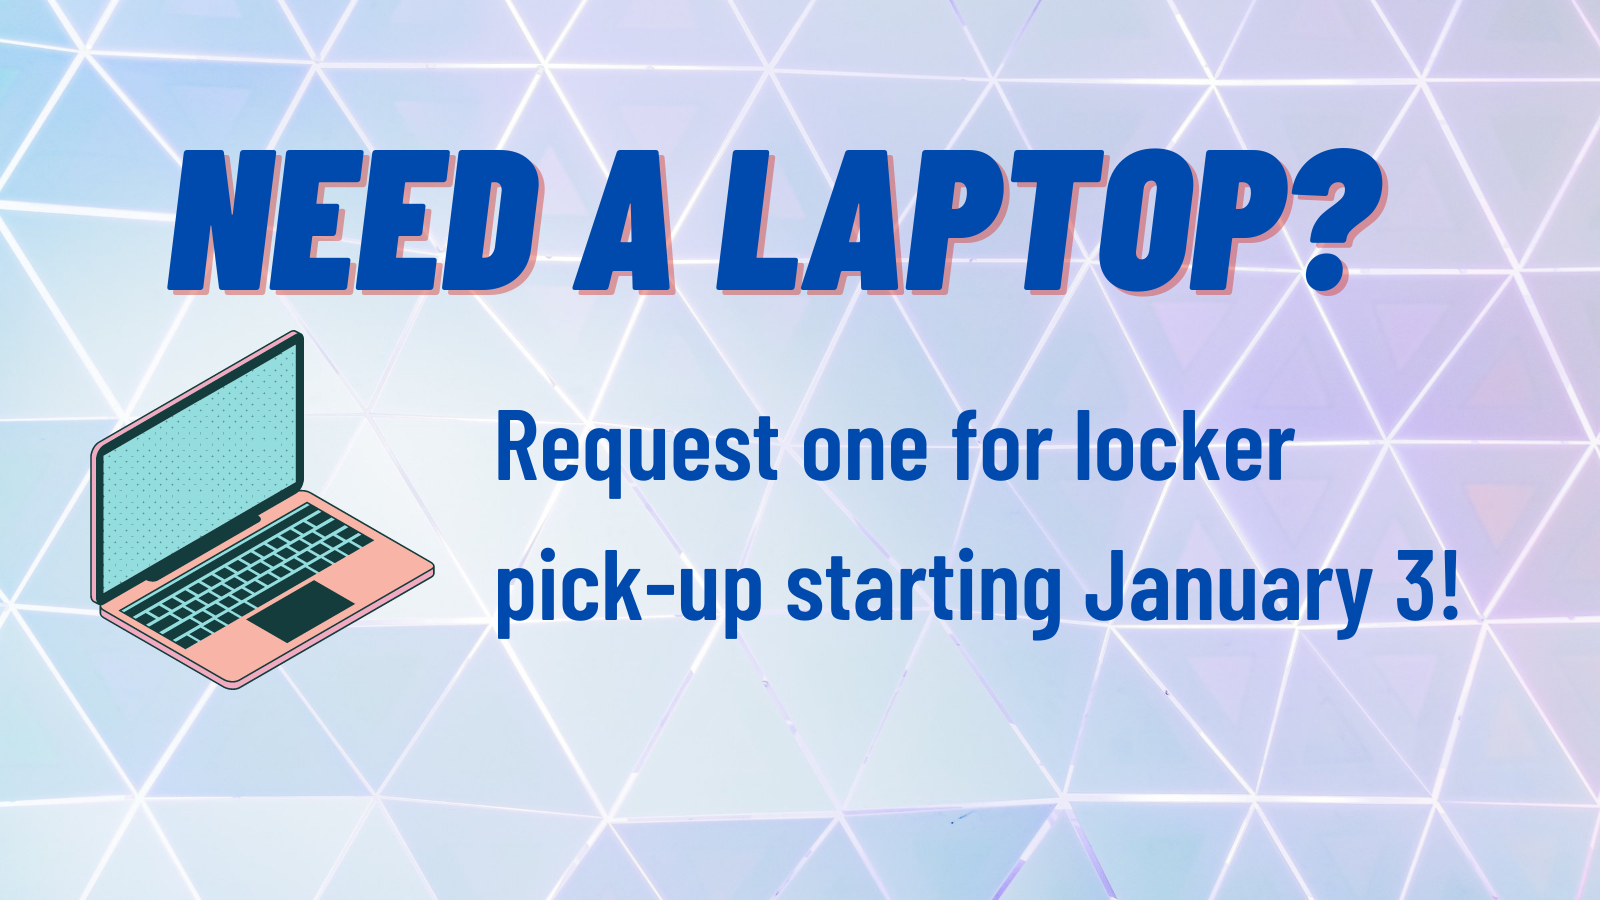 Need a laptop? Request one for locker pick-up starting January 3!